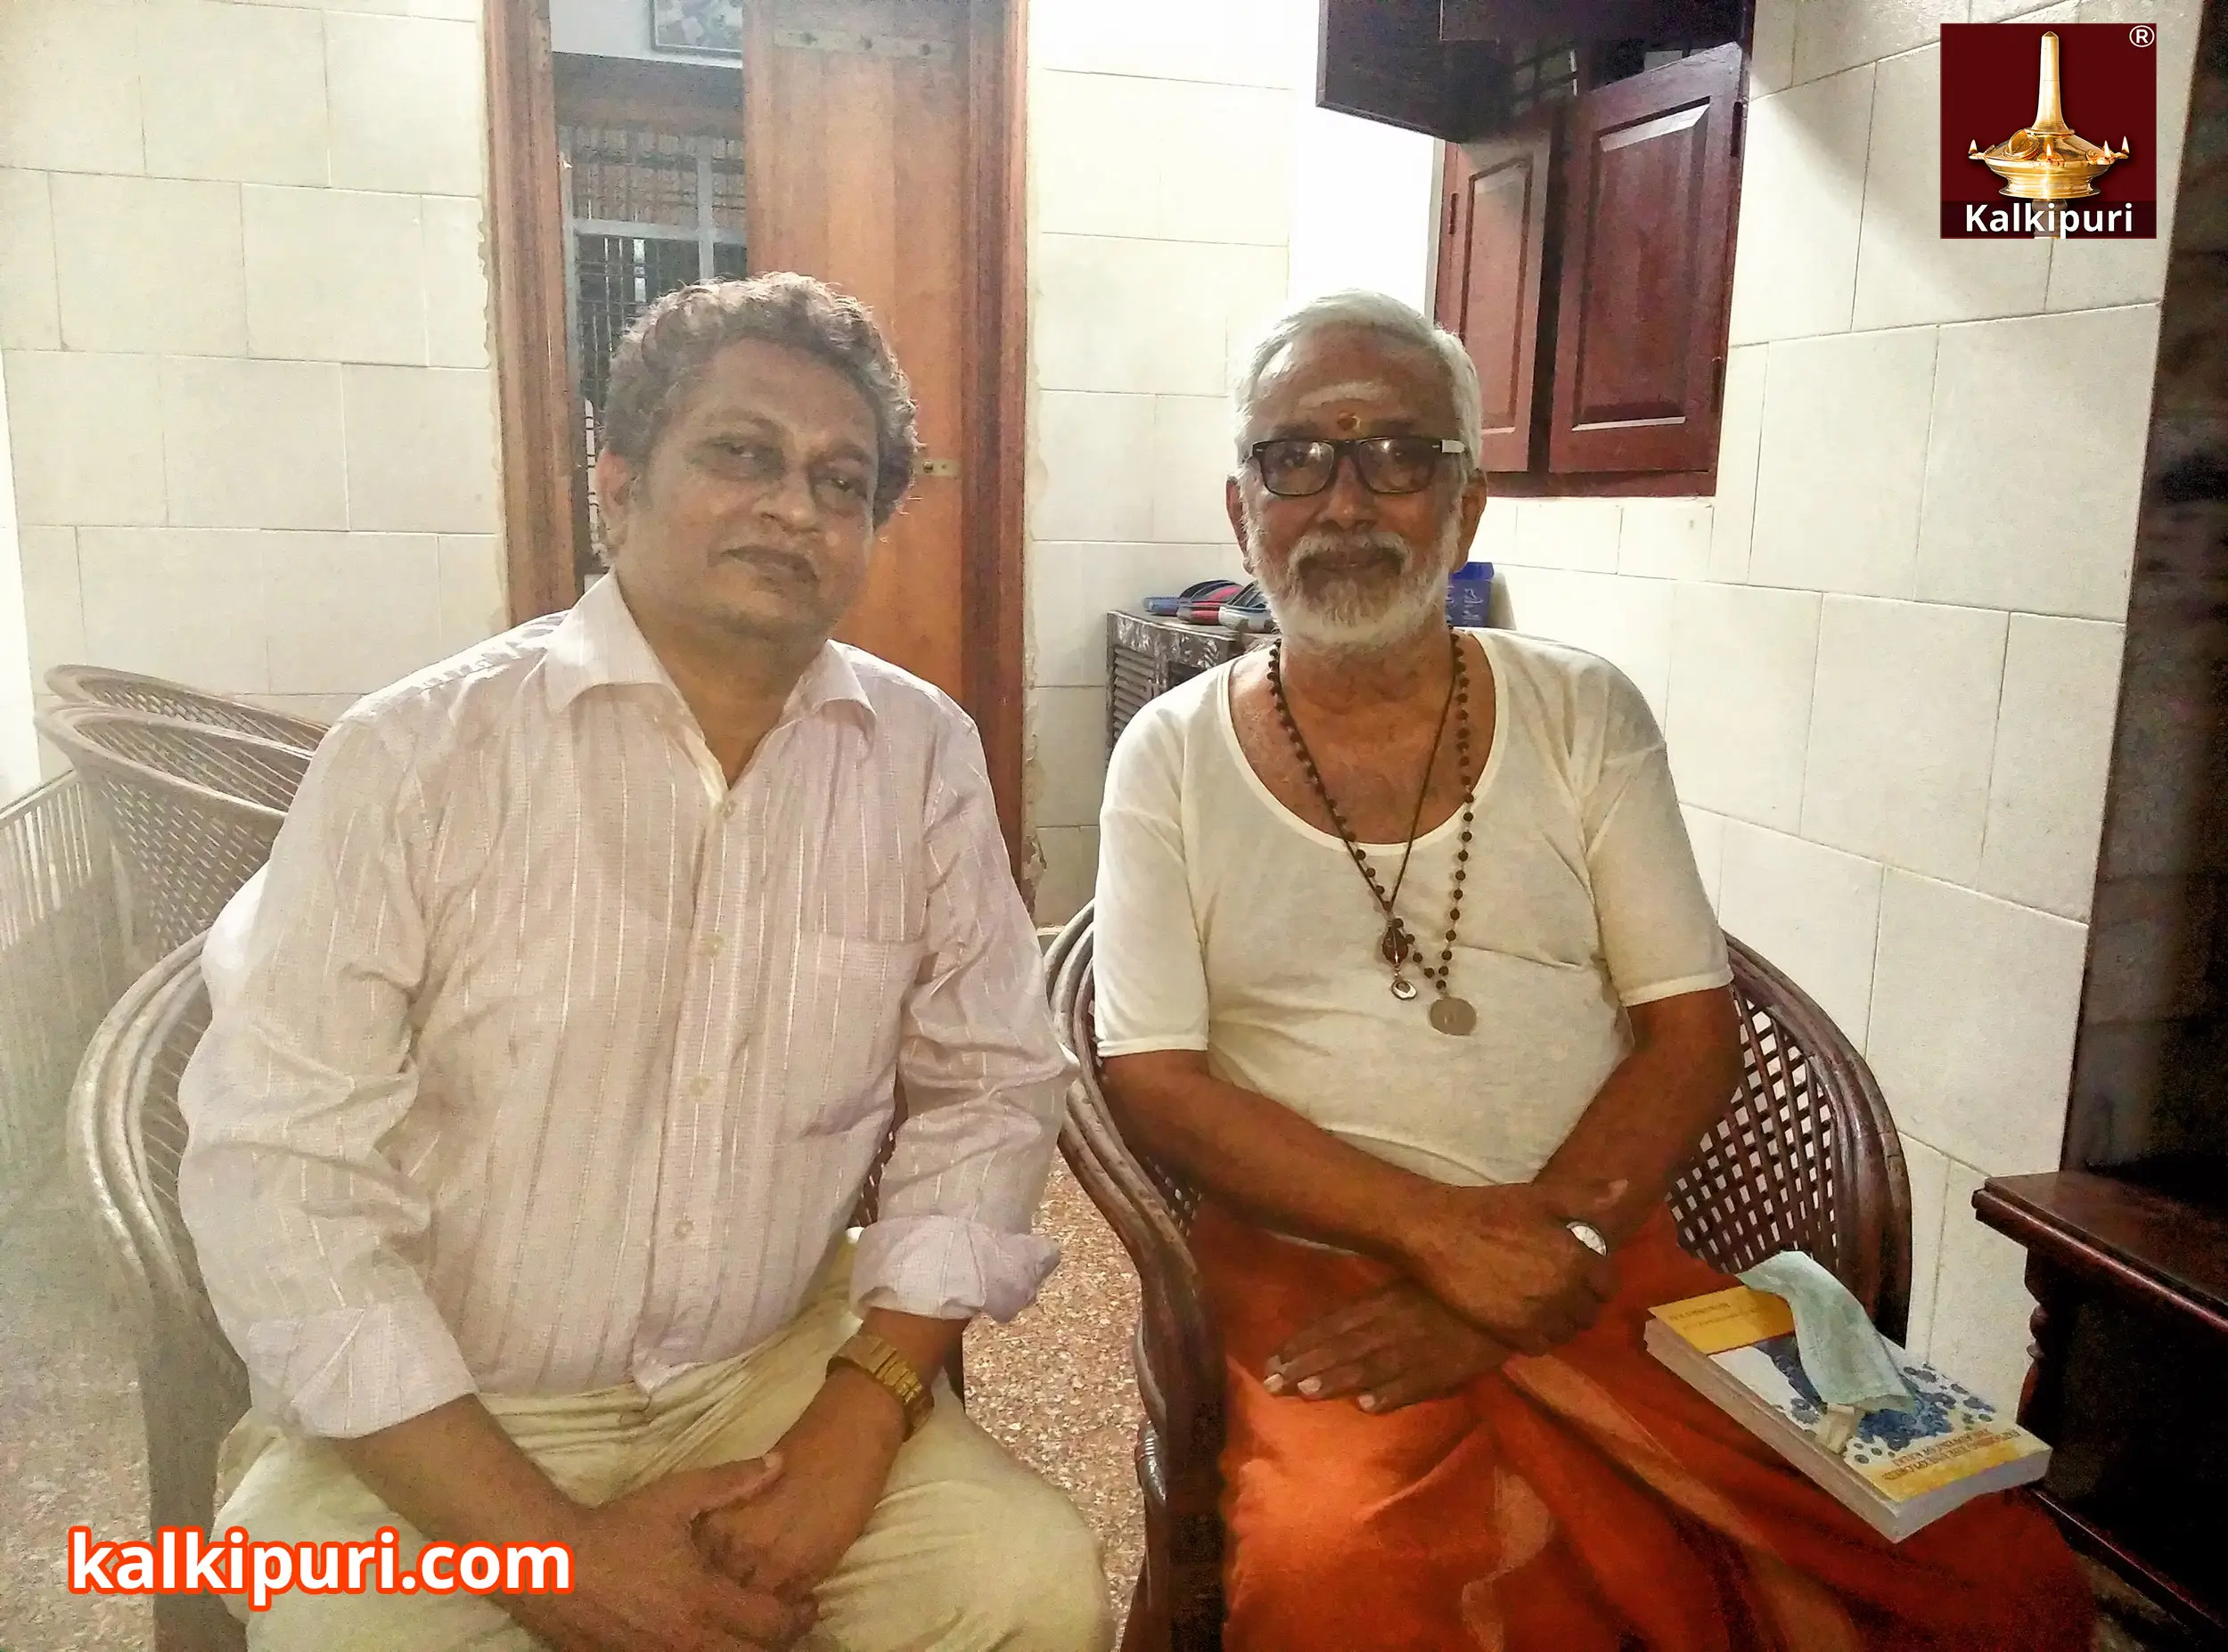 Mukundaraj handed over his Autobiography (EXPLORING THE UNEXPLORED : THE ADVENT OF KALKI) to Chandrahasan.